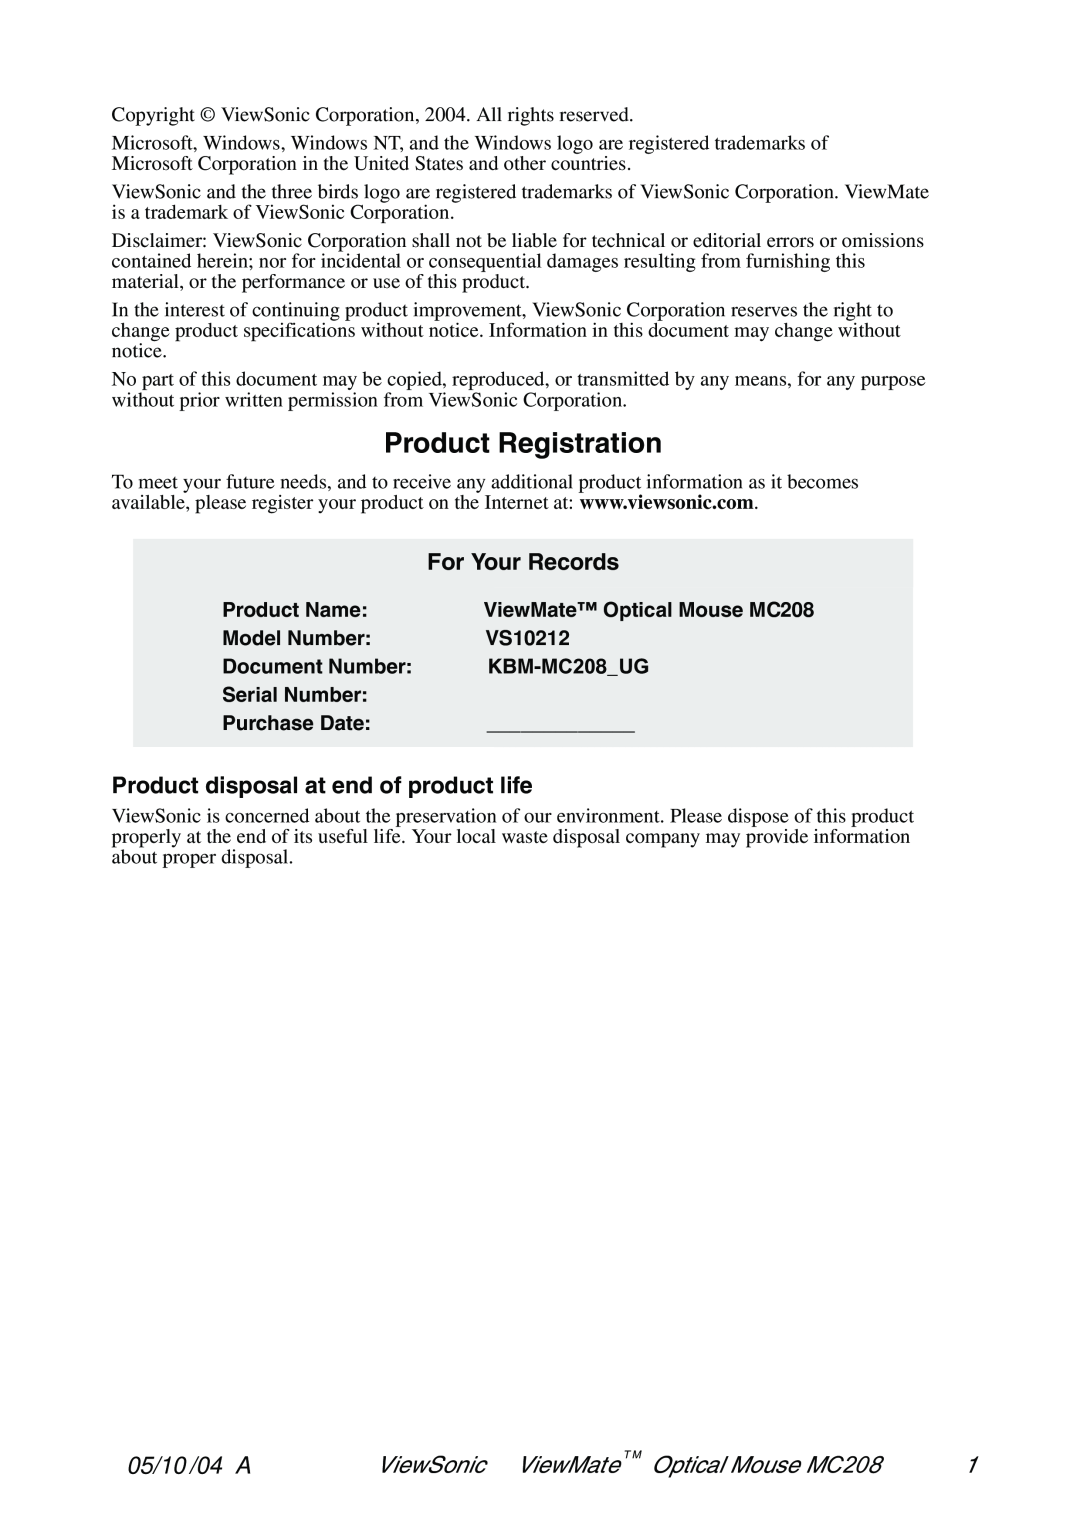 ViewSonic VS102127 manual Product Registration, For Your Records, Product disposal at end of product life, 05/10 /04 A 